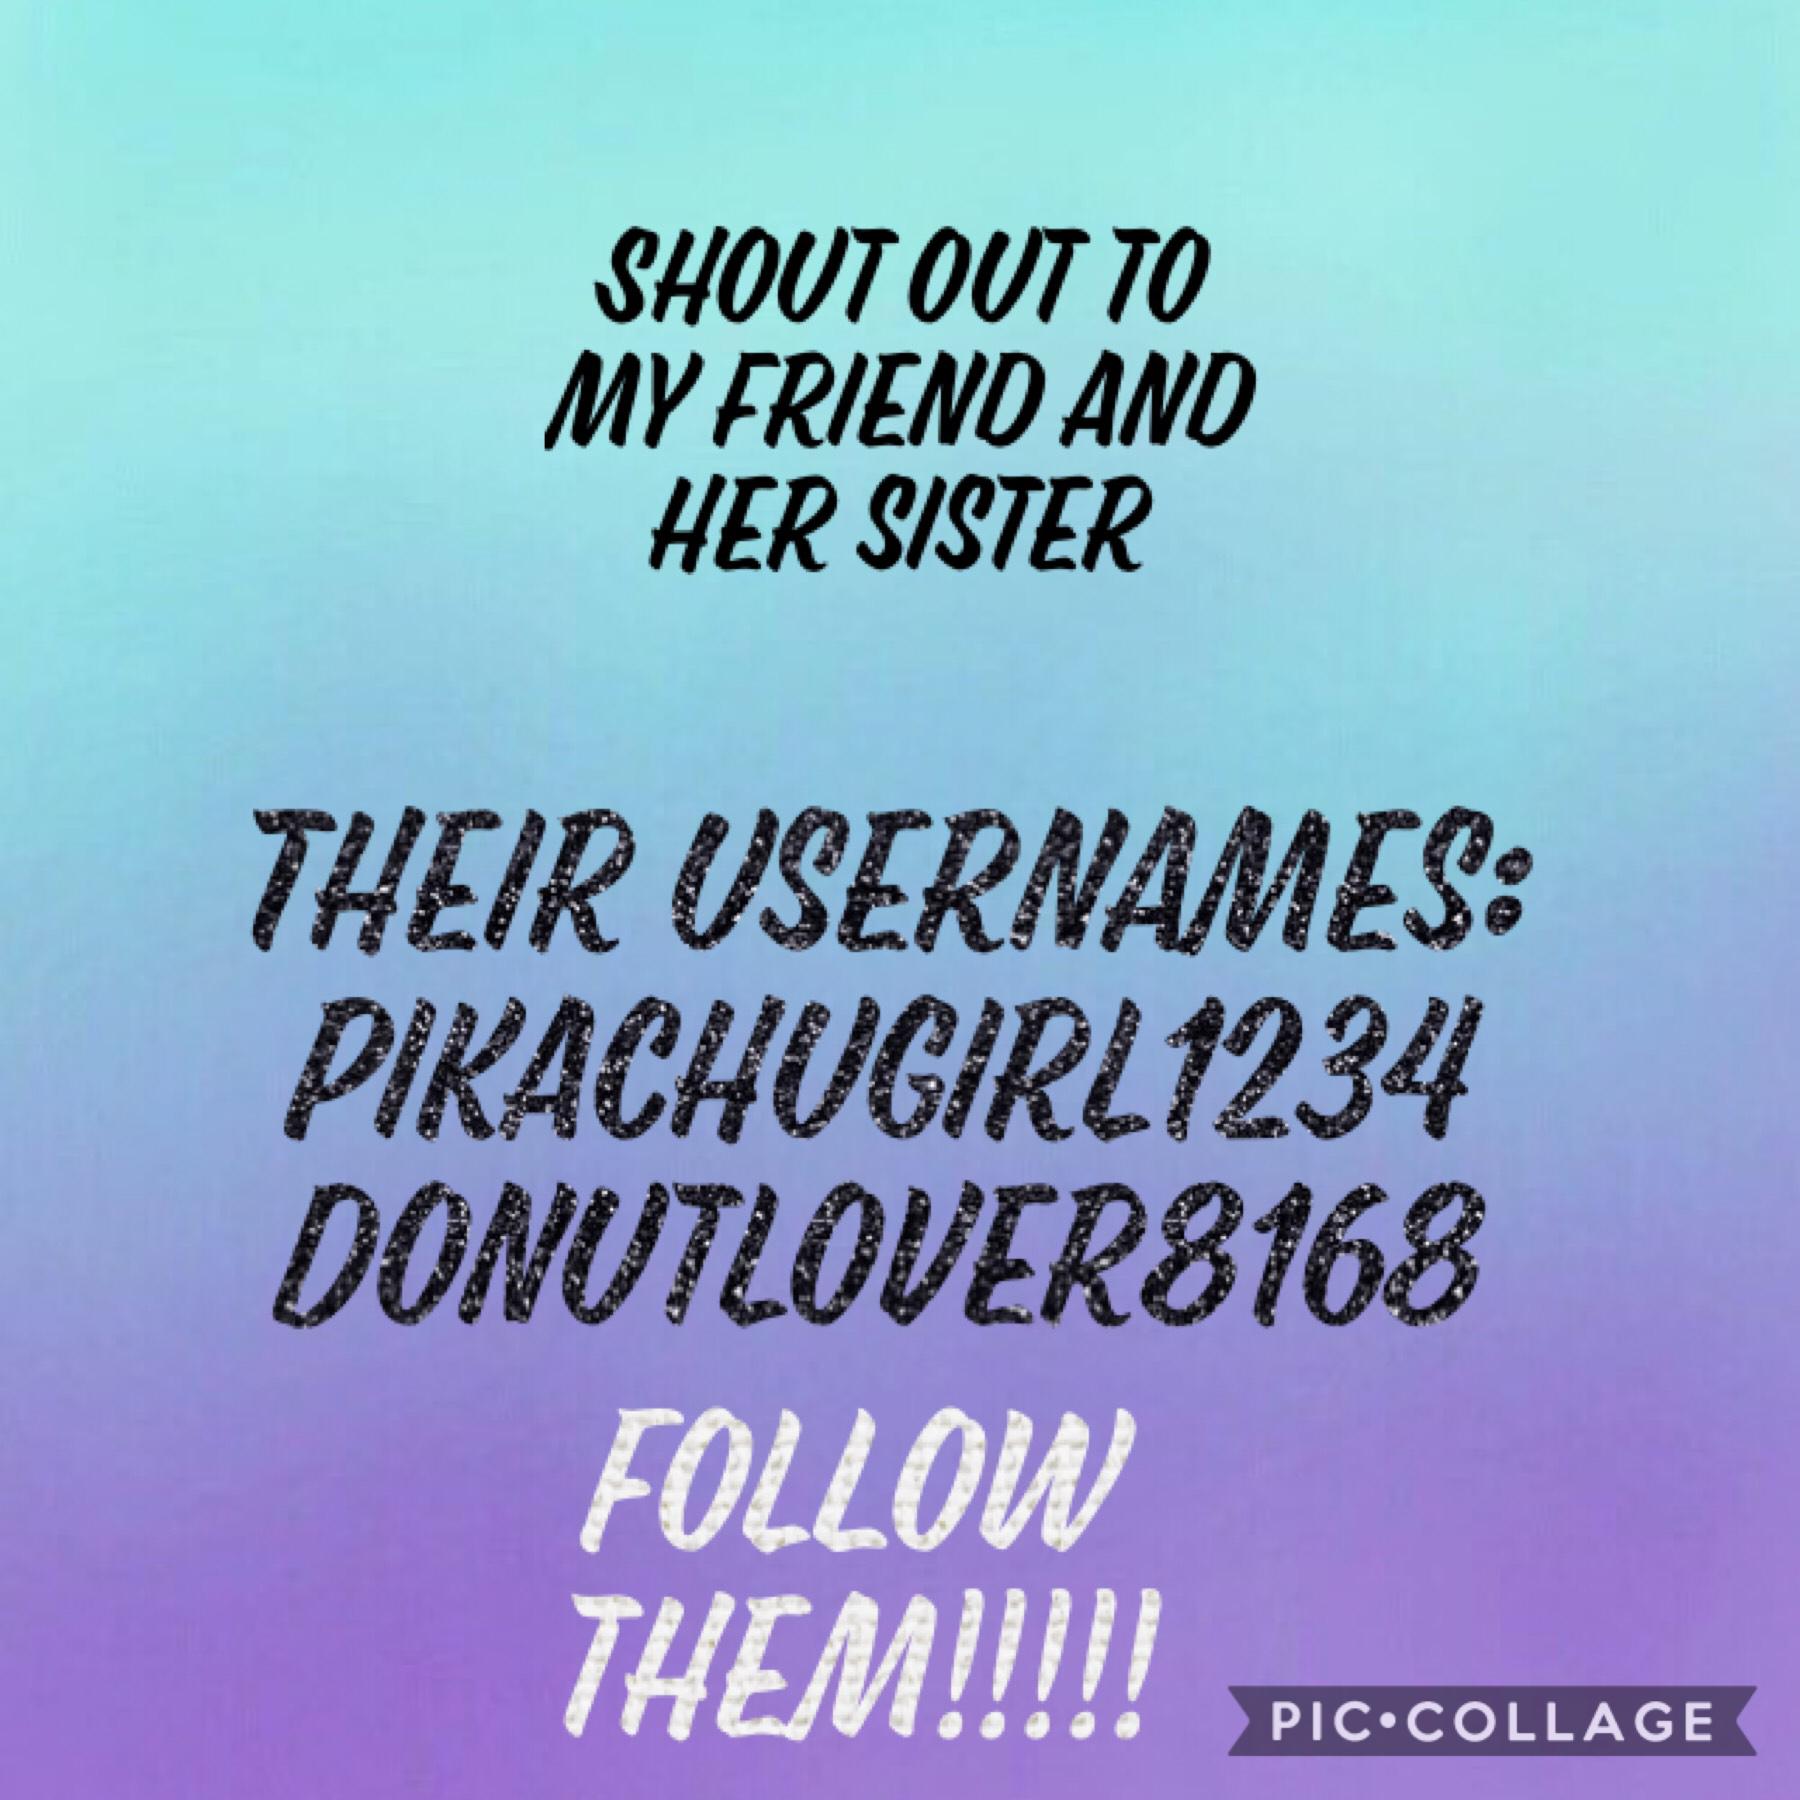 Follow them!!! And me too.